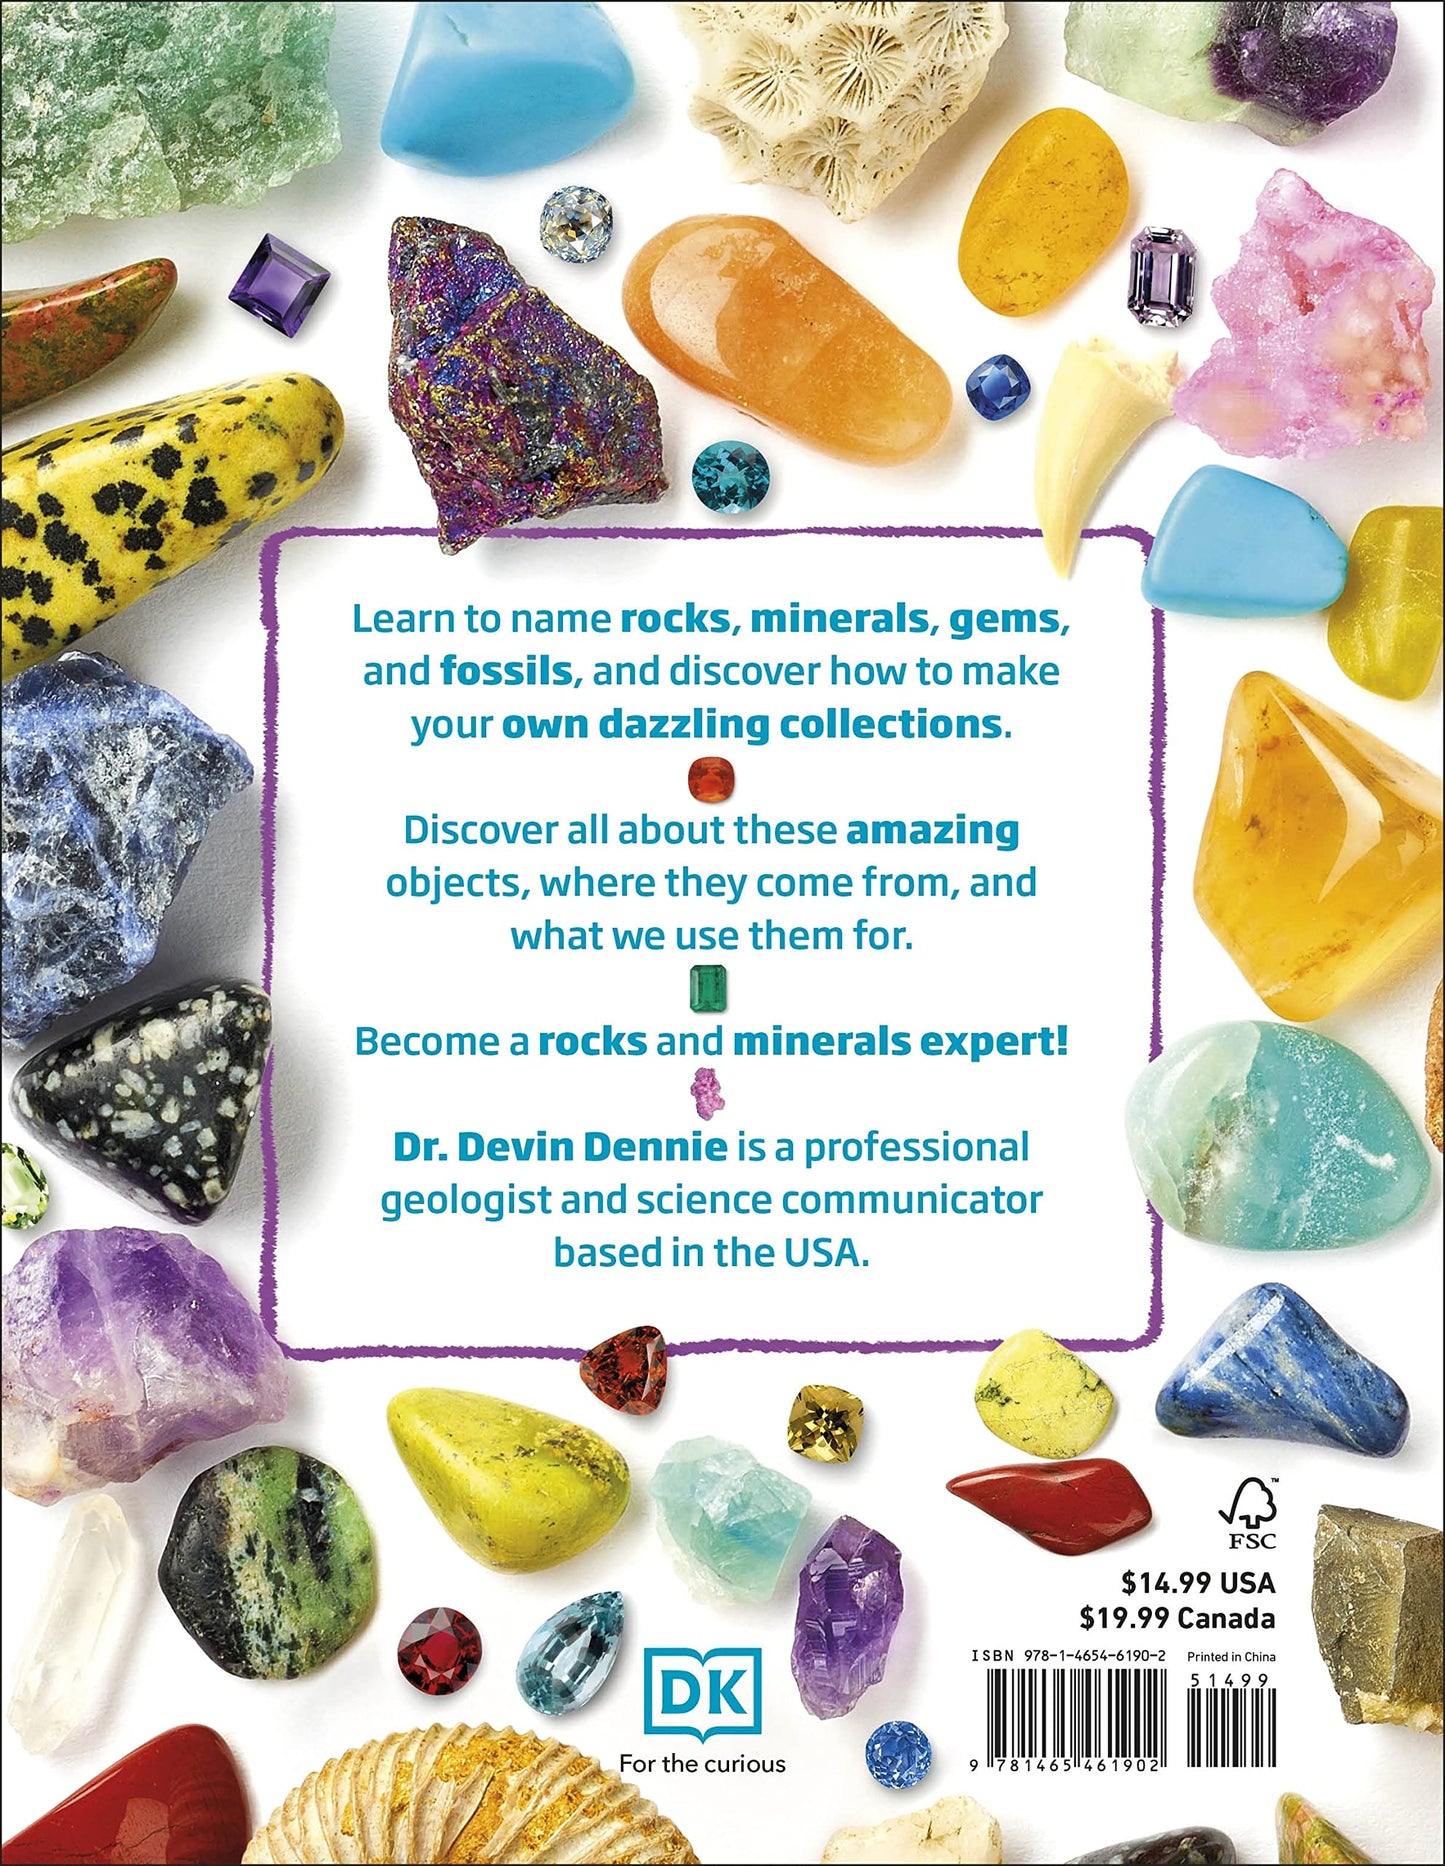 My Book of Rocks and Minerals: Things to Find, Collect, and Treasure by DK